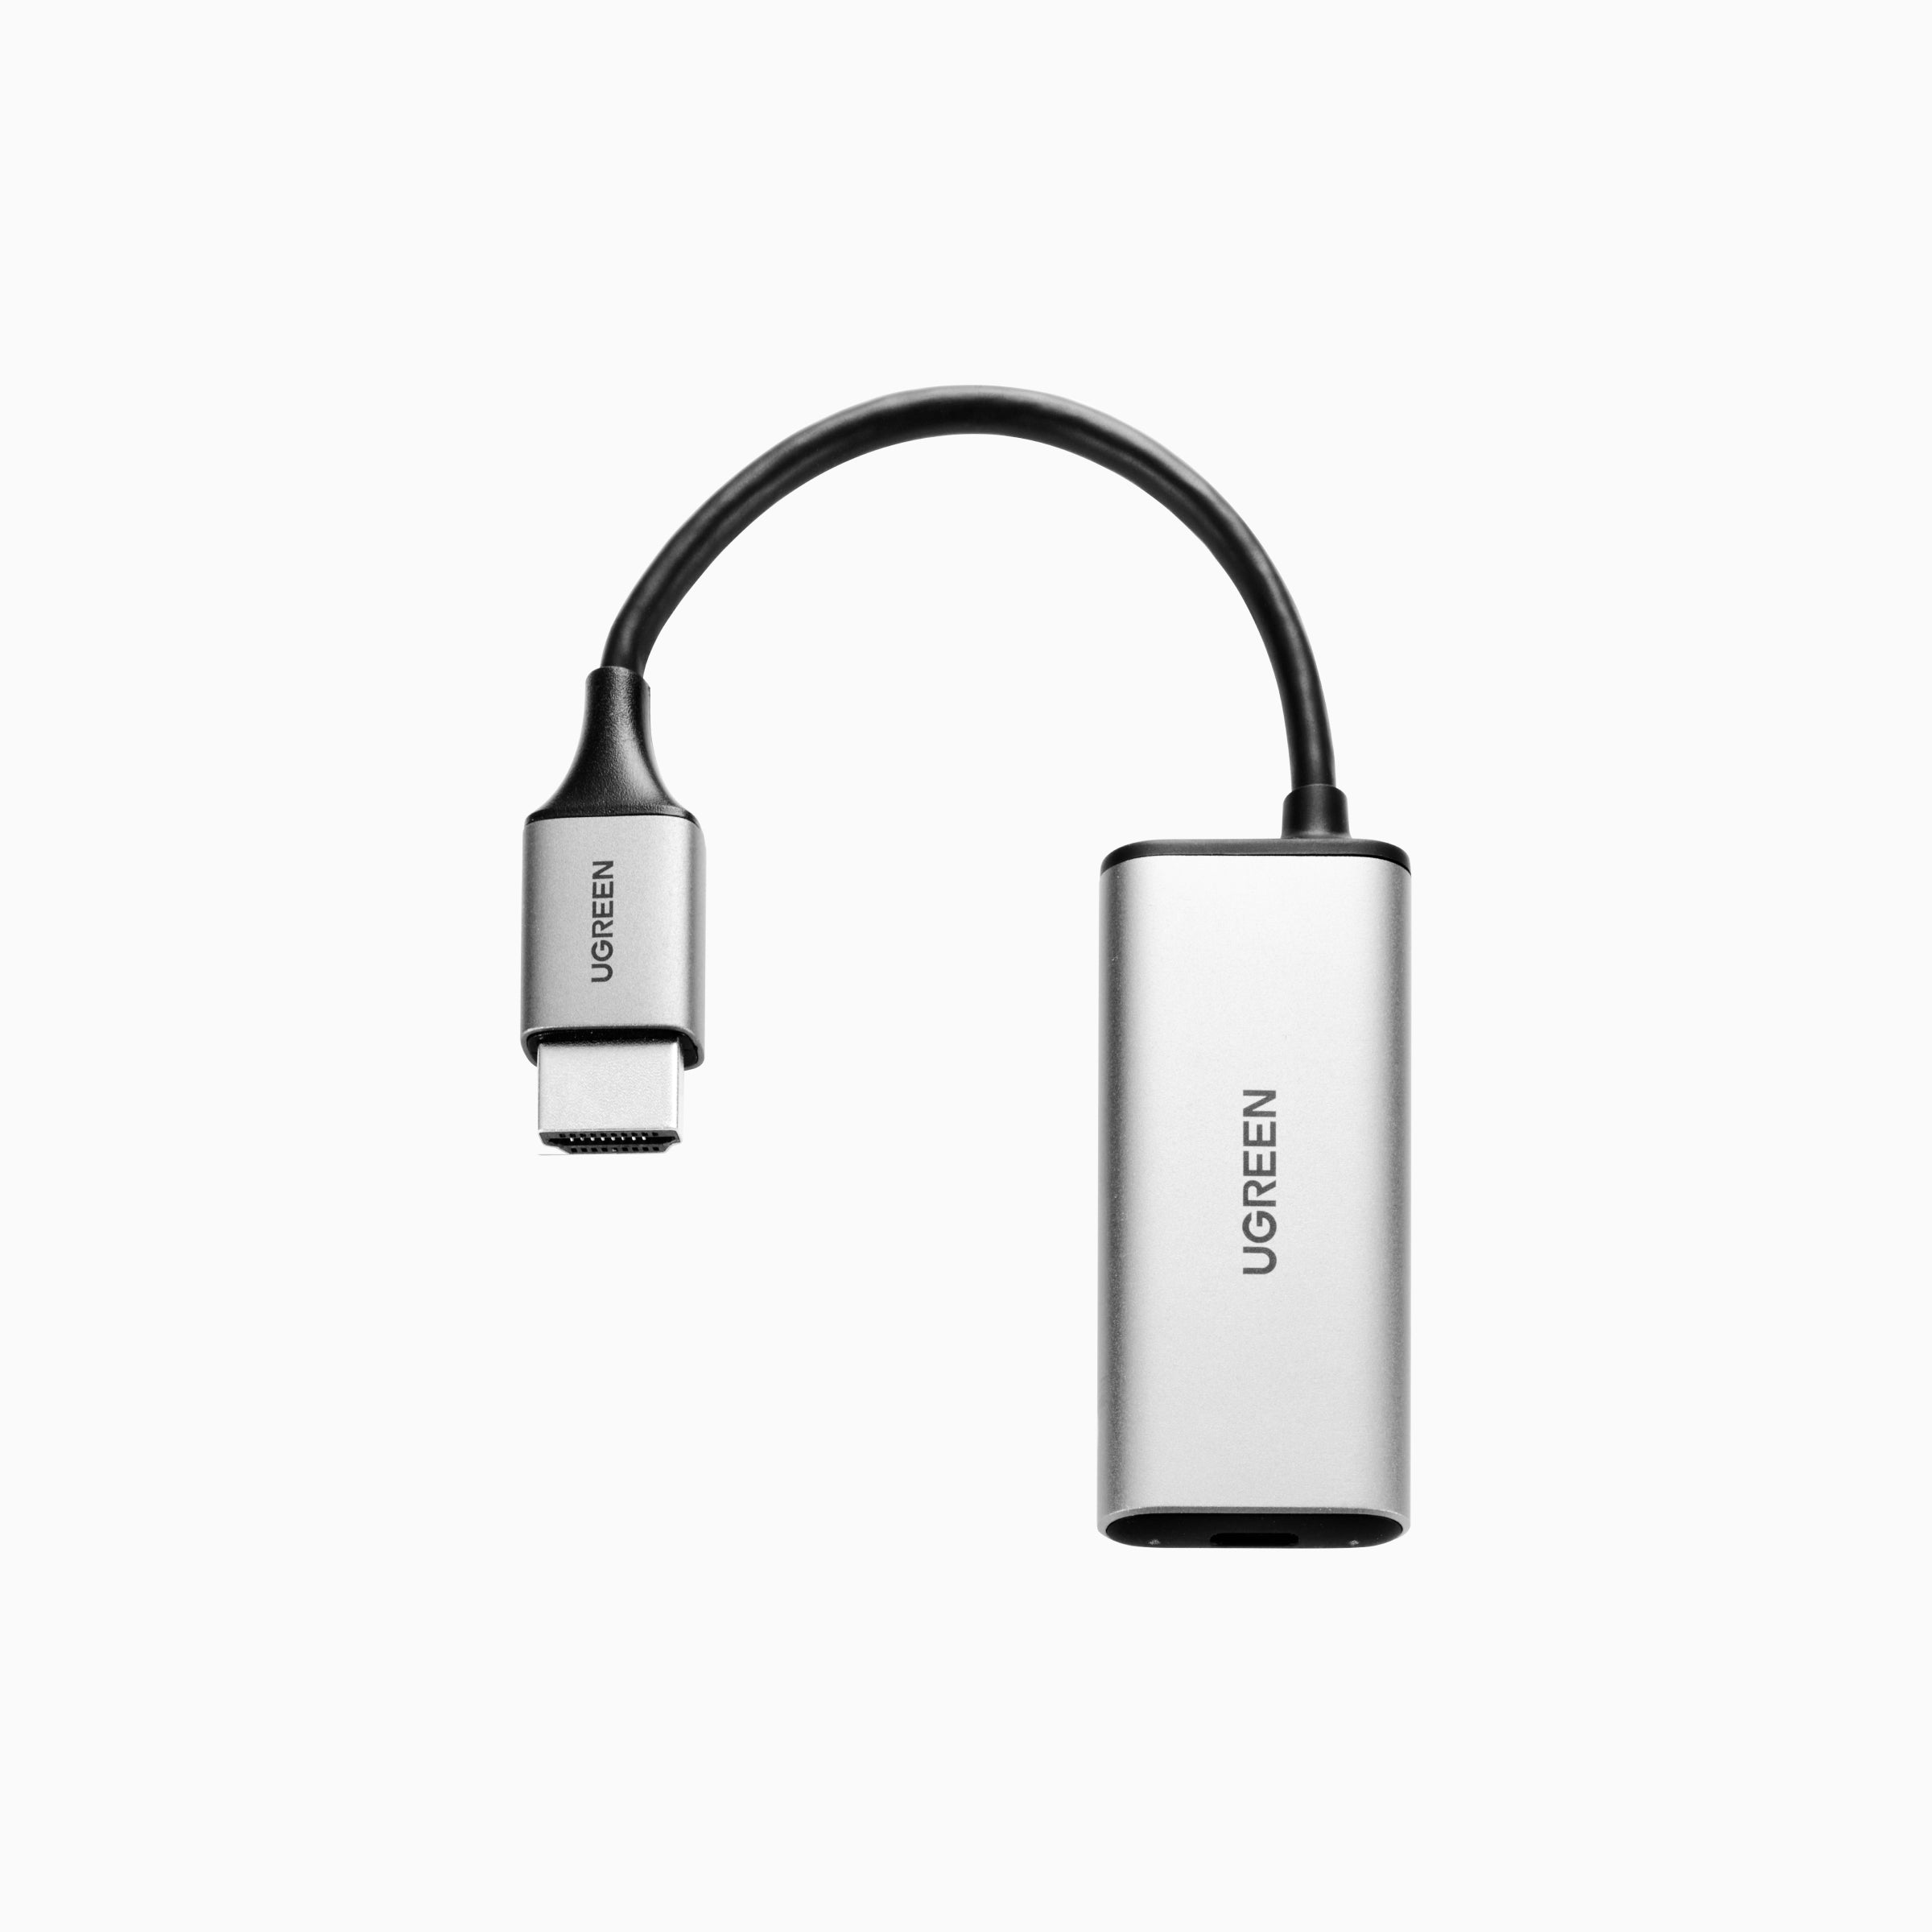 Rokid HDMI to USB-C Adapter